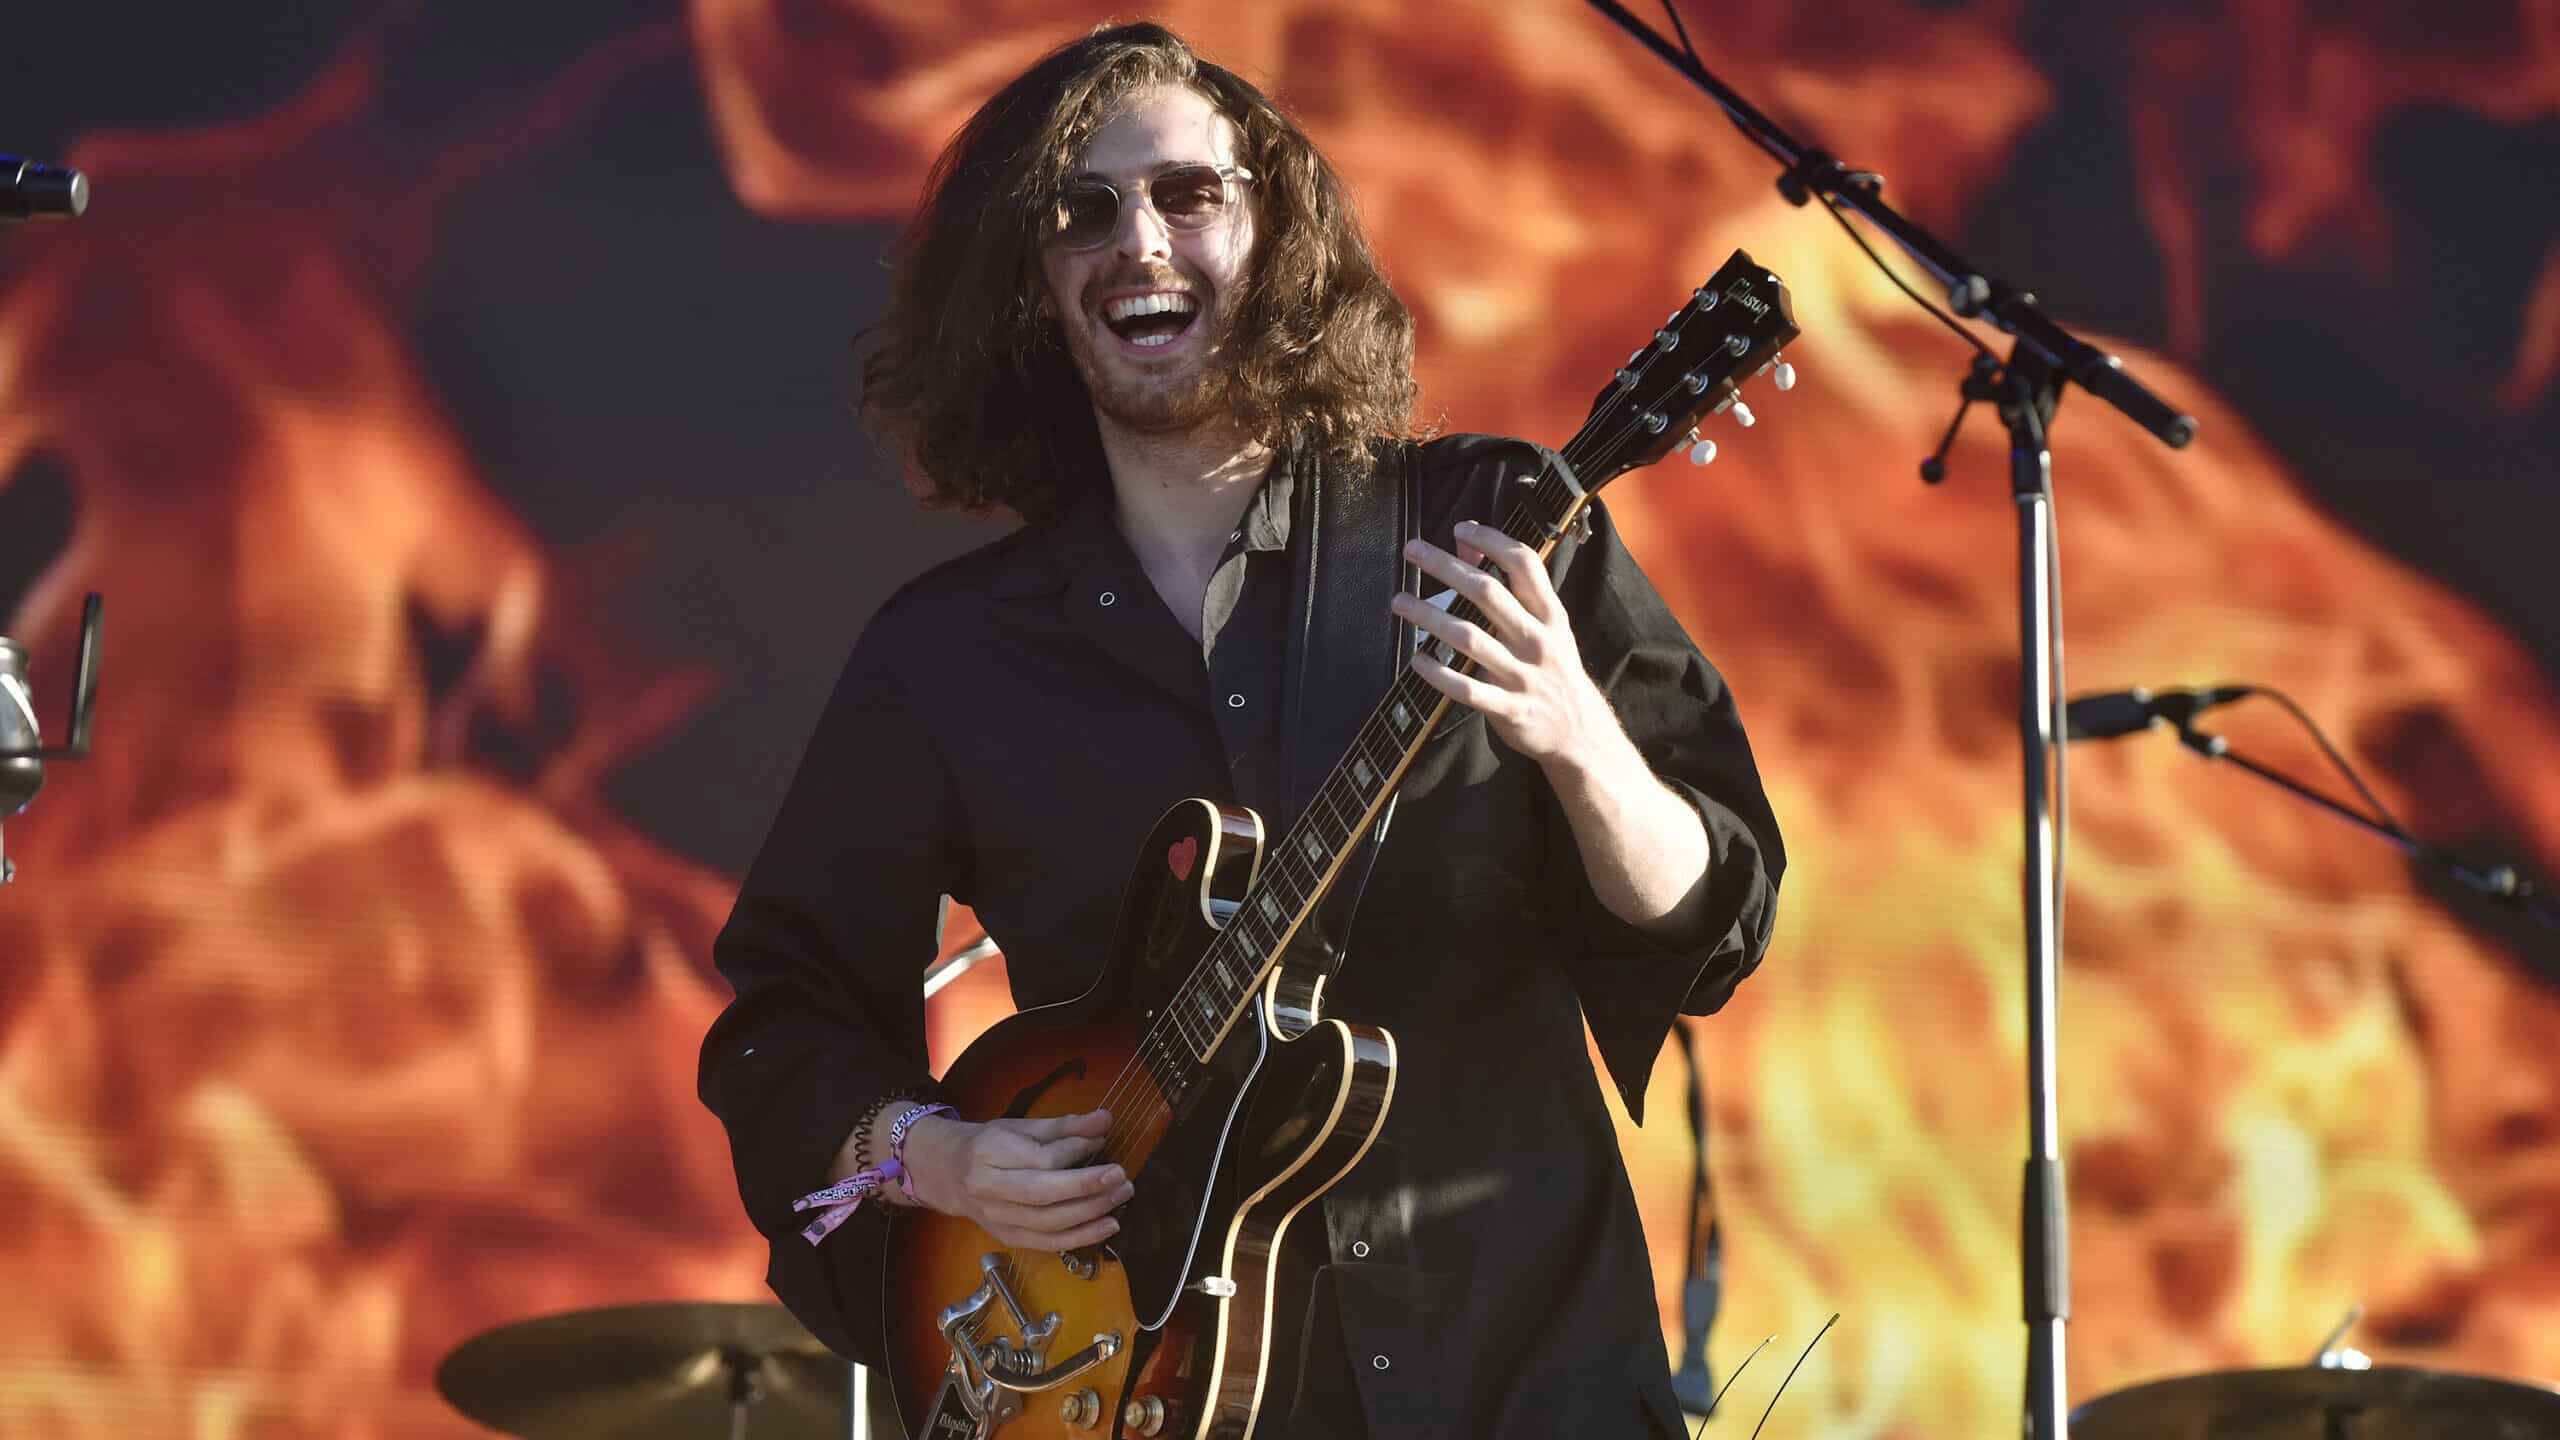 Hozier Teases New Album Release in Viral Instagram and Twitter Posts